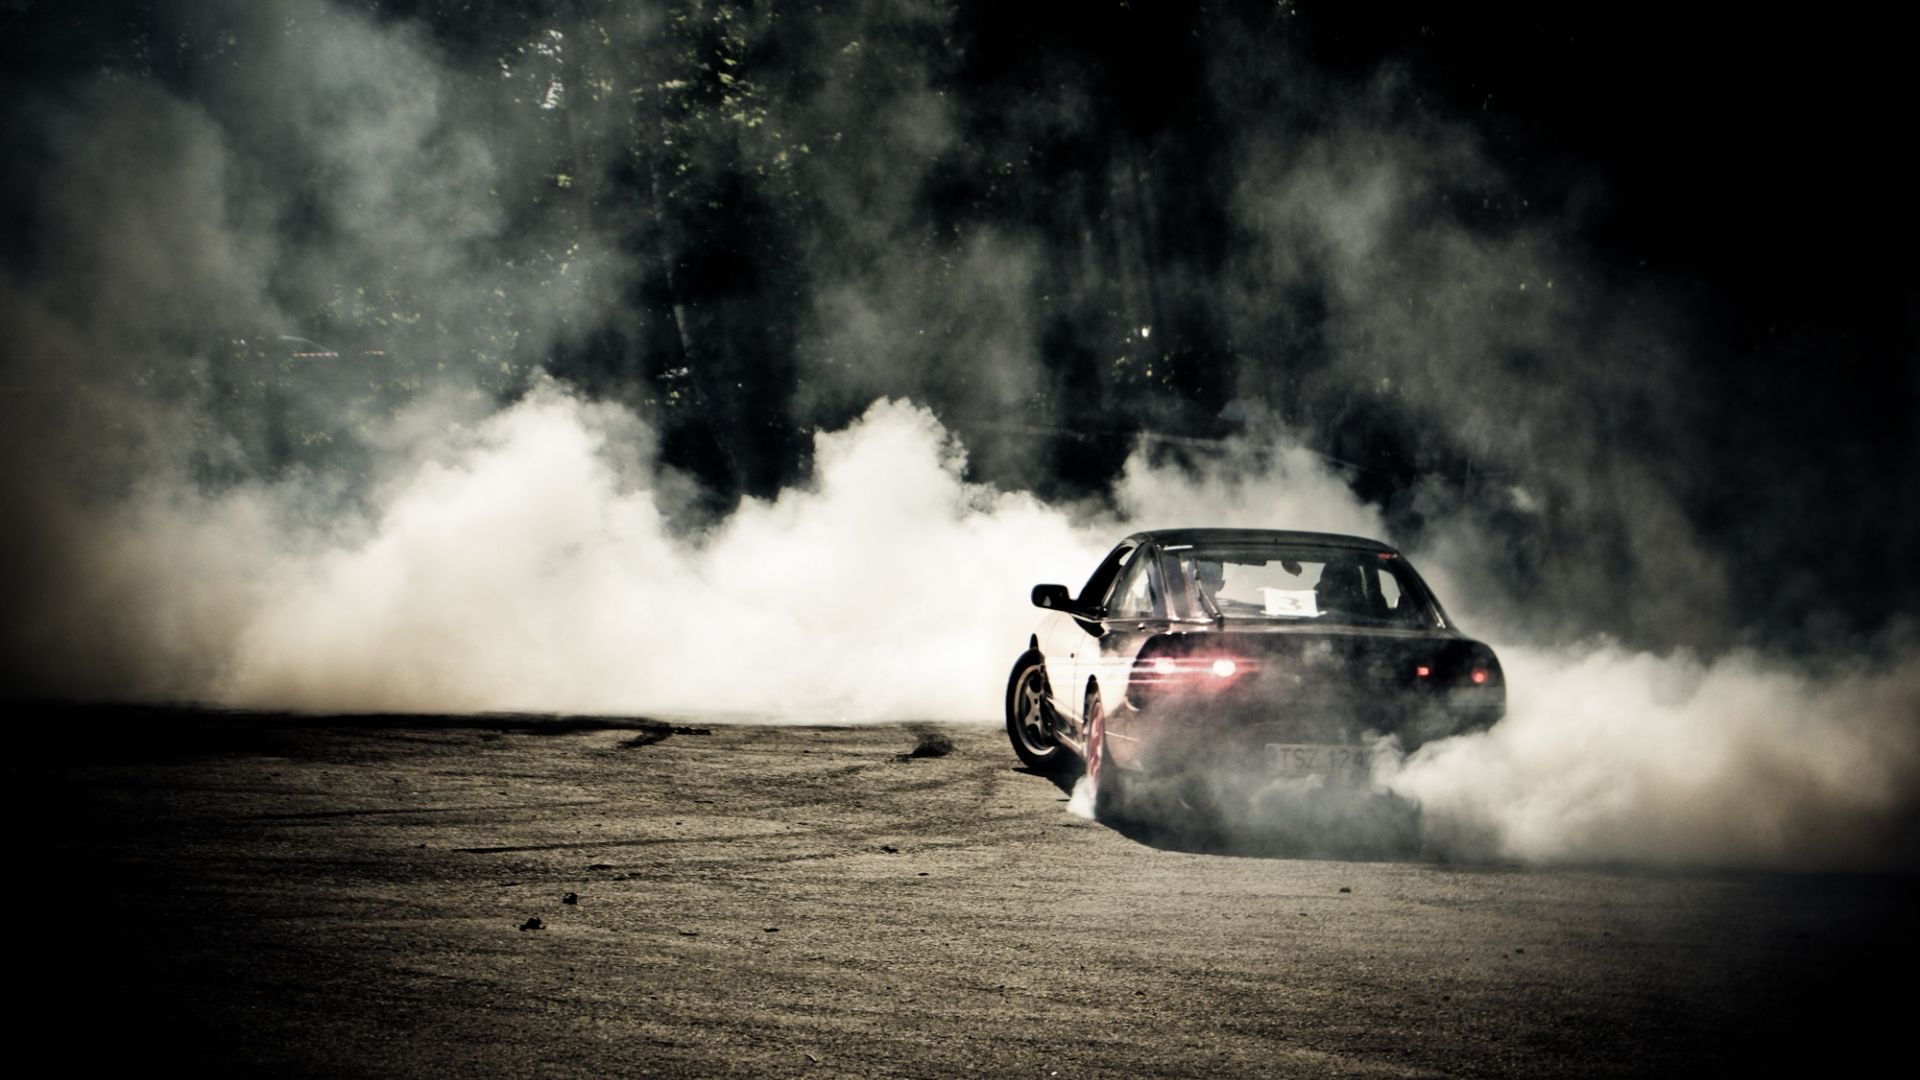 Nissan S13 S2k Drifting Competition Background Pictures Of Drifting Cars  Background Image And Wallpaper for Free Download